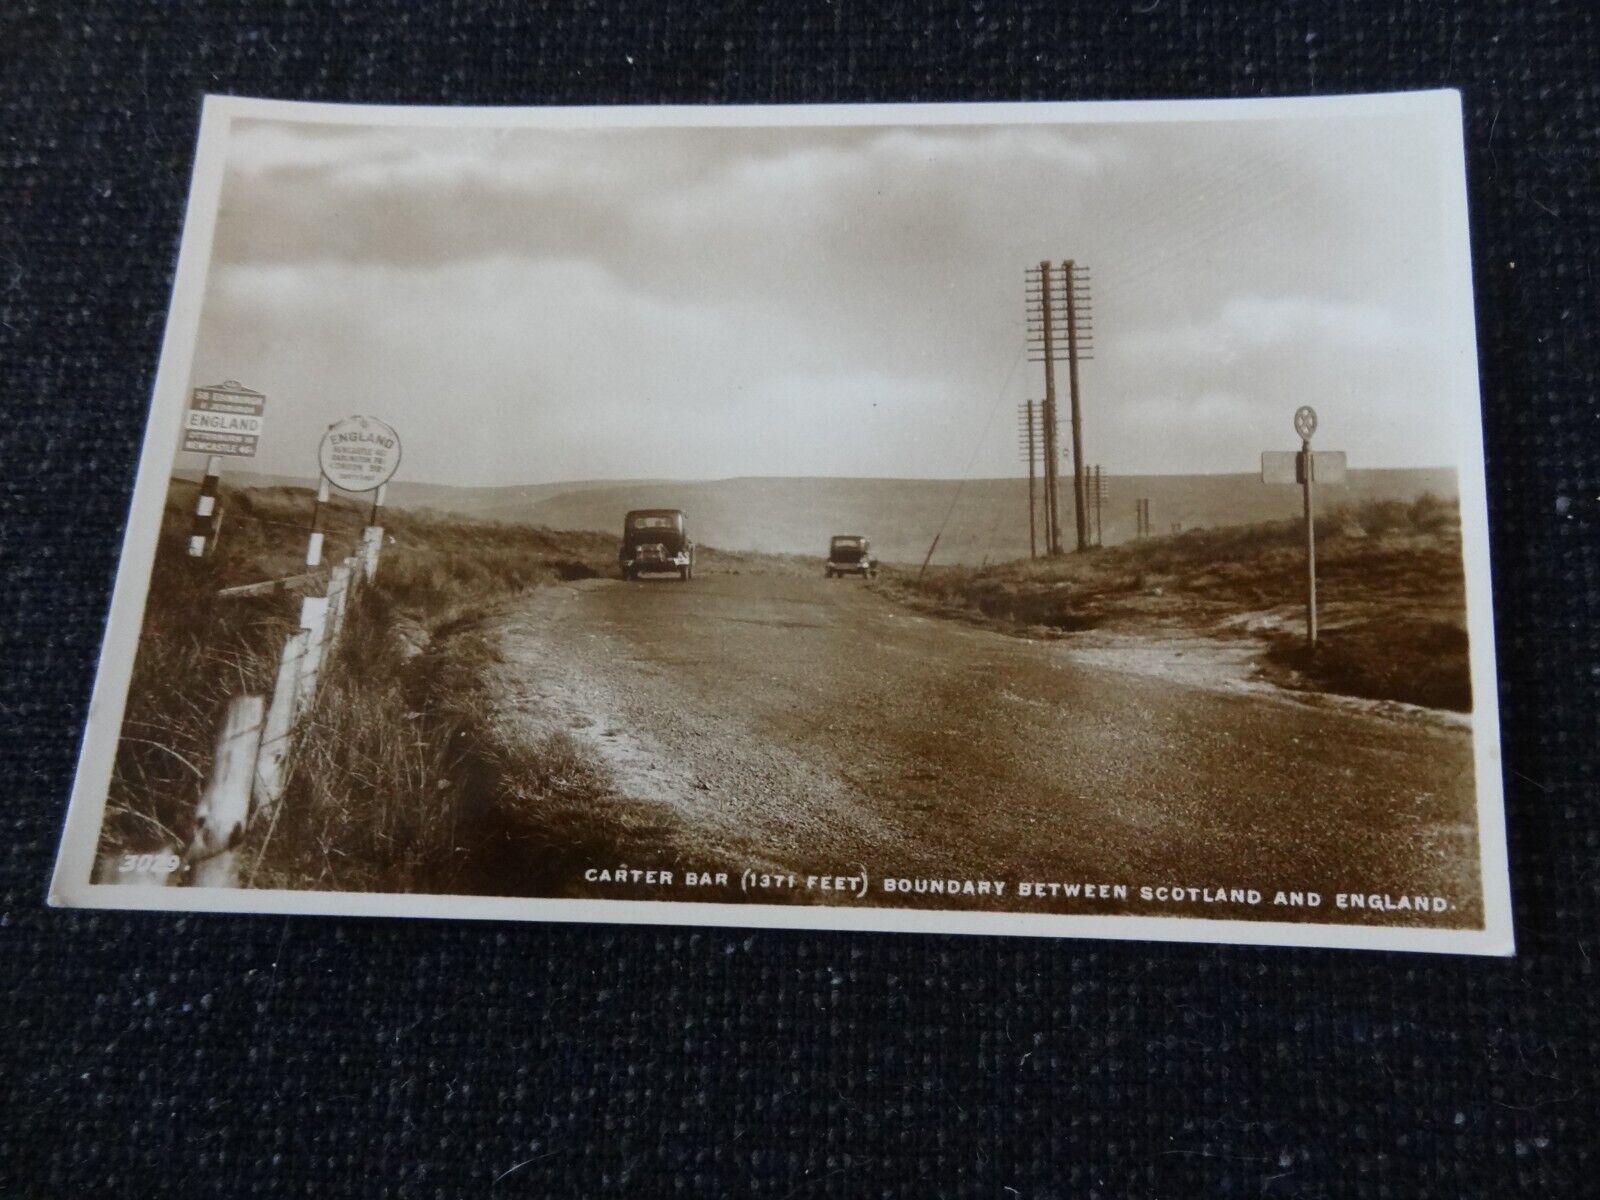 House Clearance - Carter Bar Boundary Between Scotland and England service By Edwards Selkirk - 6